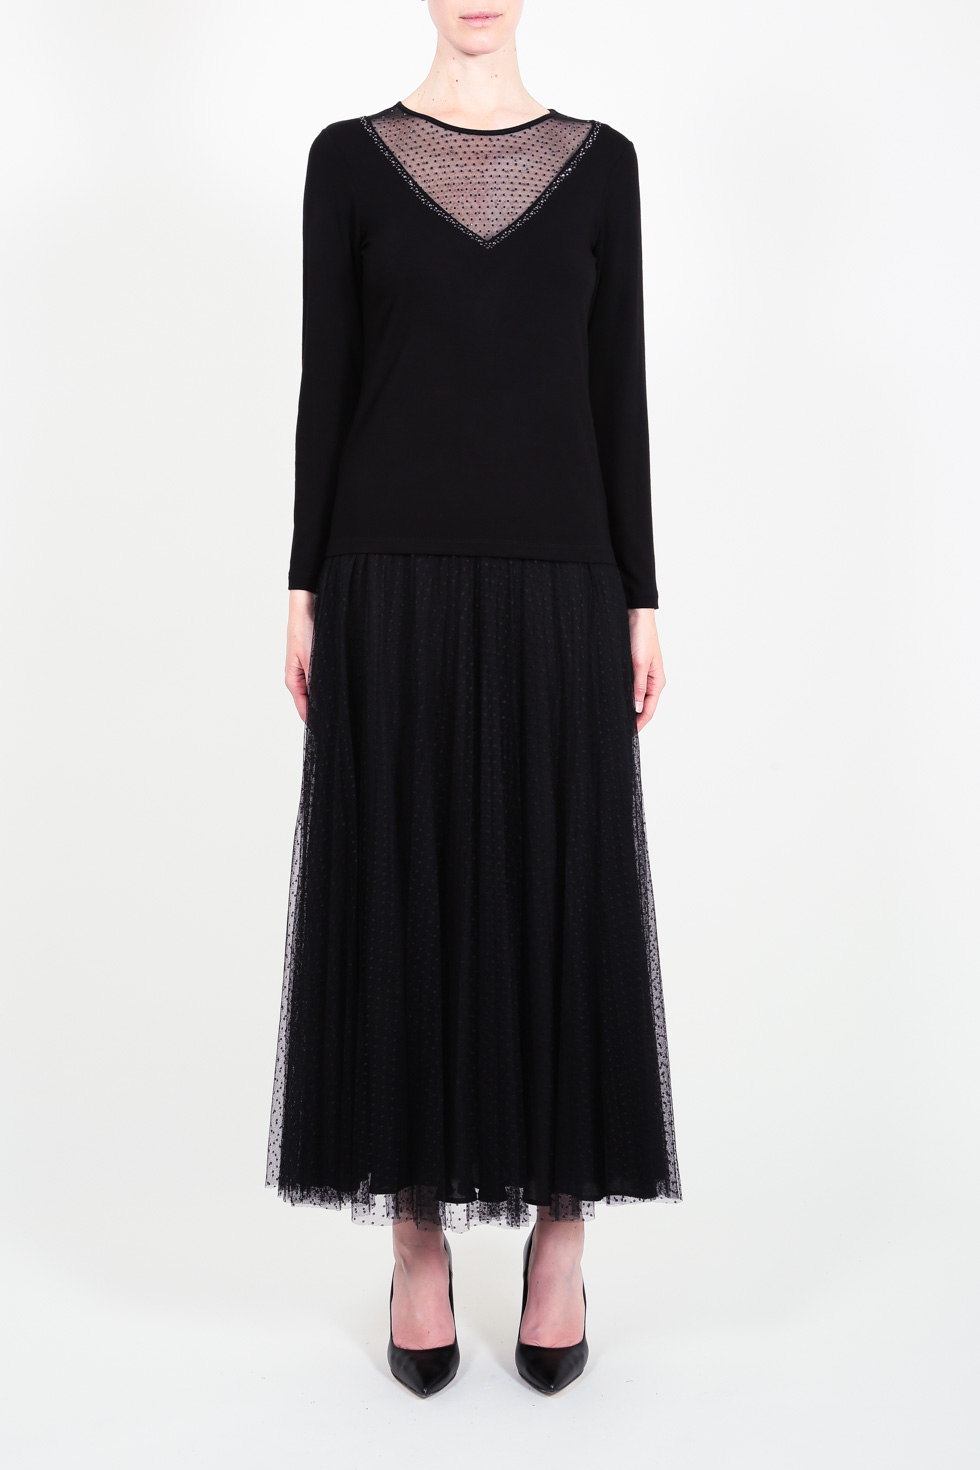 ELISA FANTI F/W 21/22 SERIE ForeveRed GONNA LUNGA A RUOTA IN TULLE PLUMETISSE